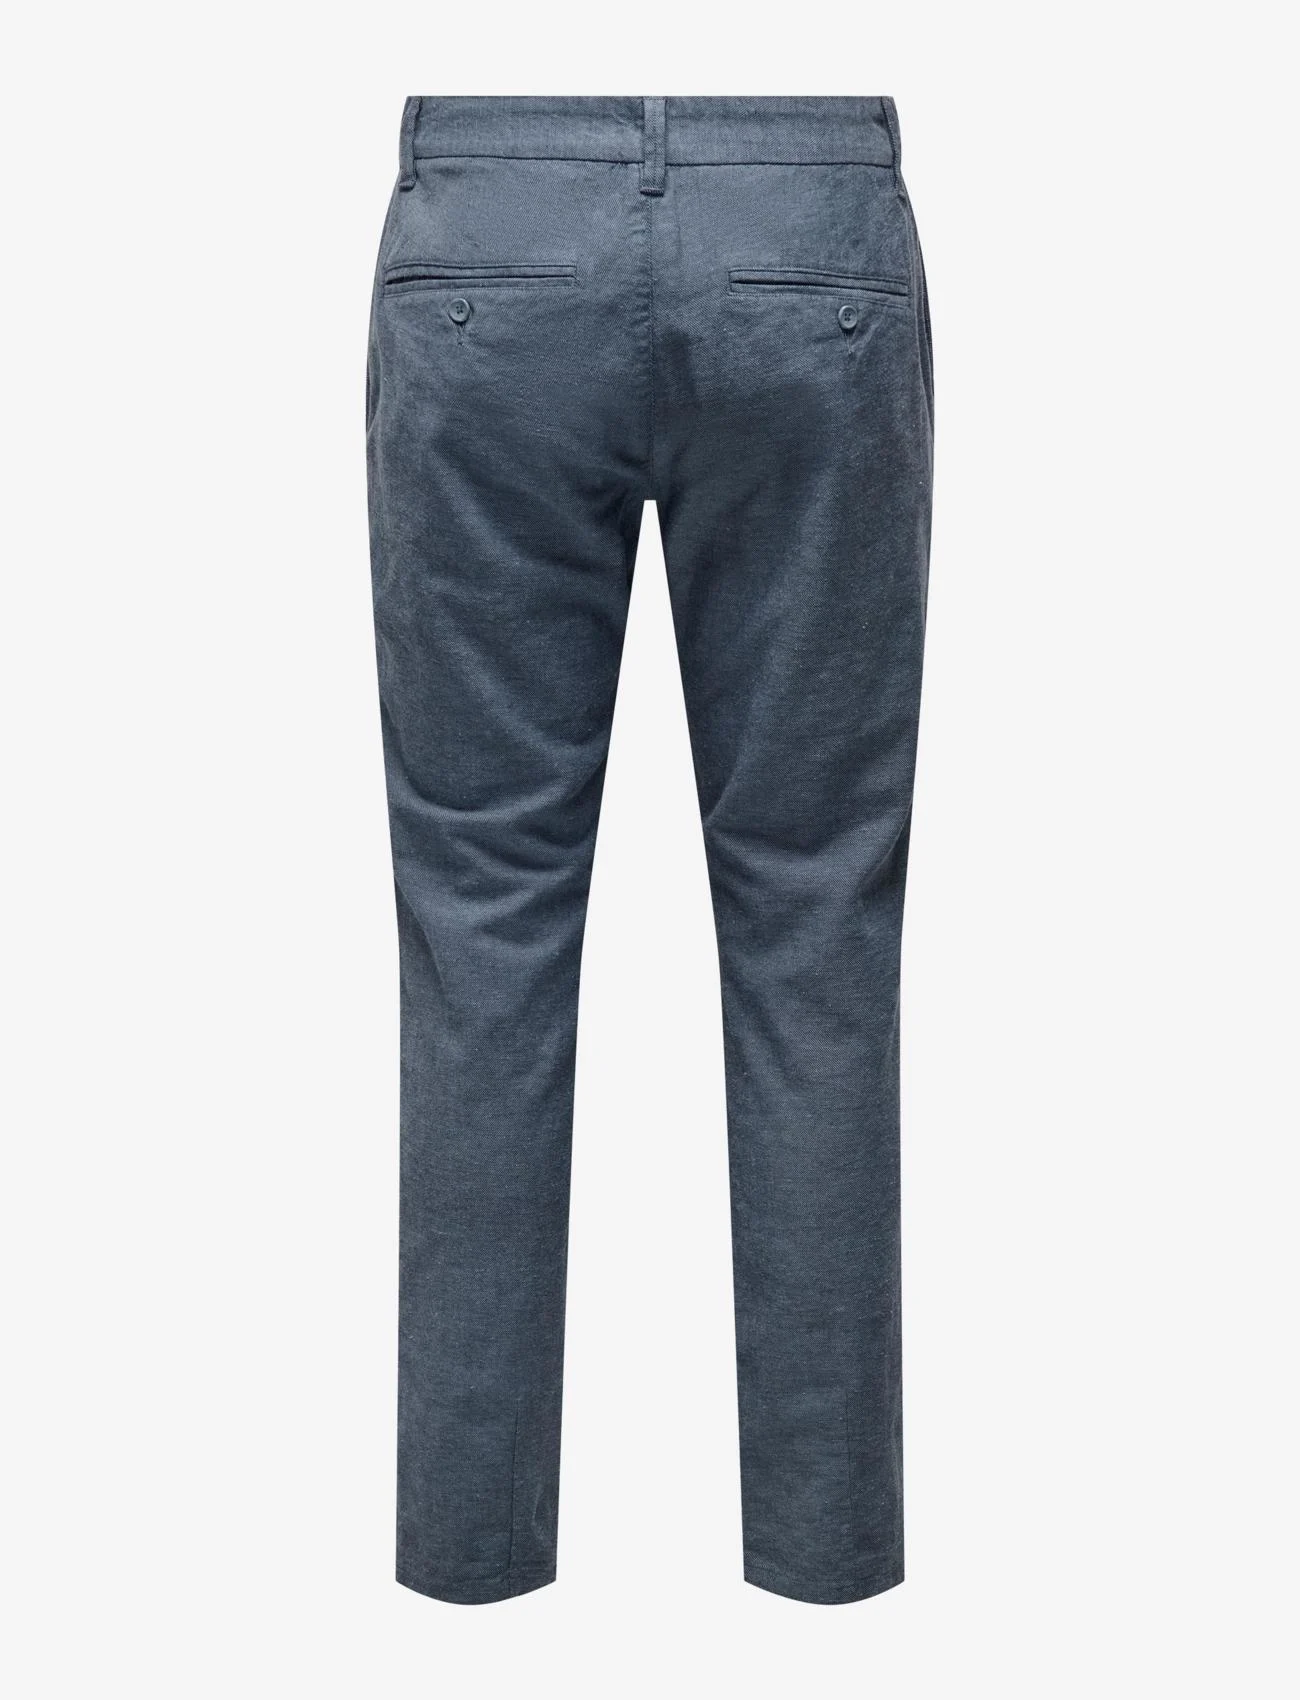 ONLY & SONS - ONSMARK TAP 0011 COTTON LINEN PNT - chinos - dark navy - 1